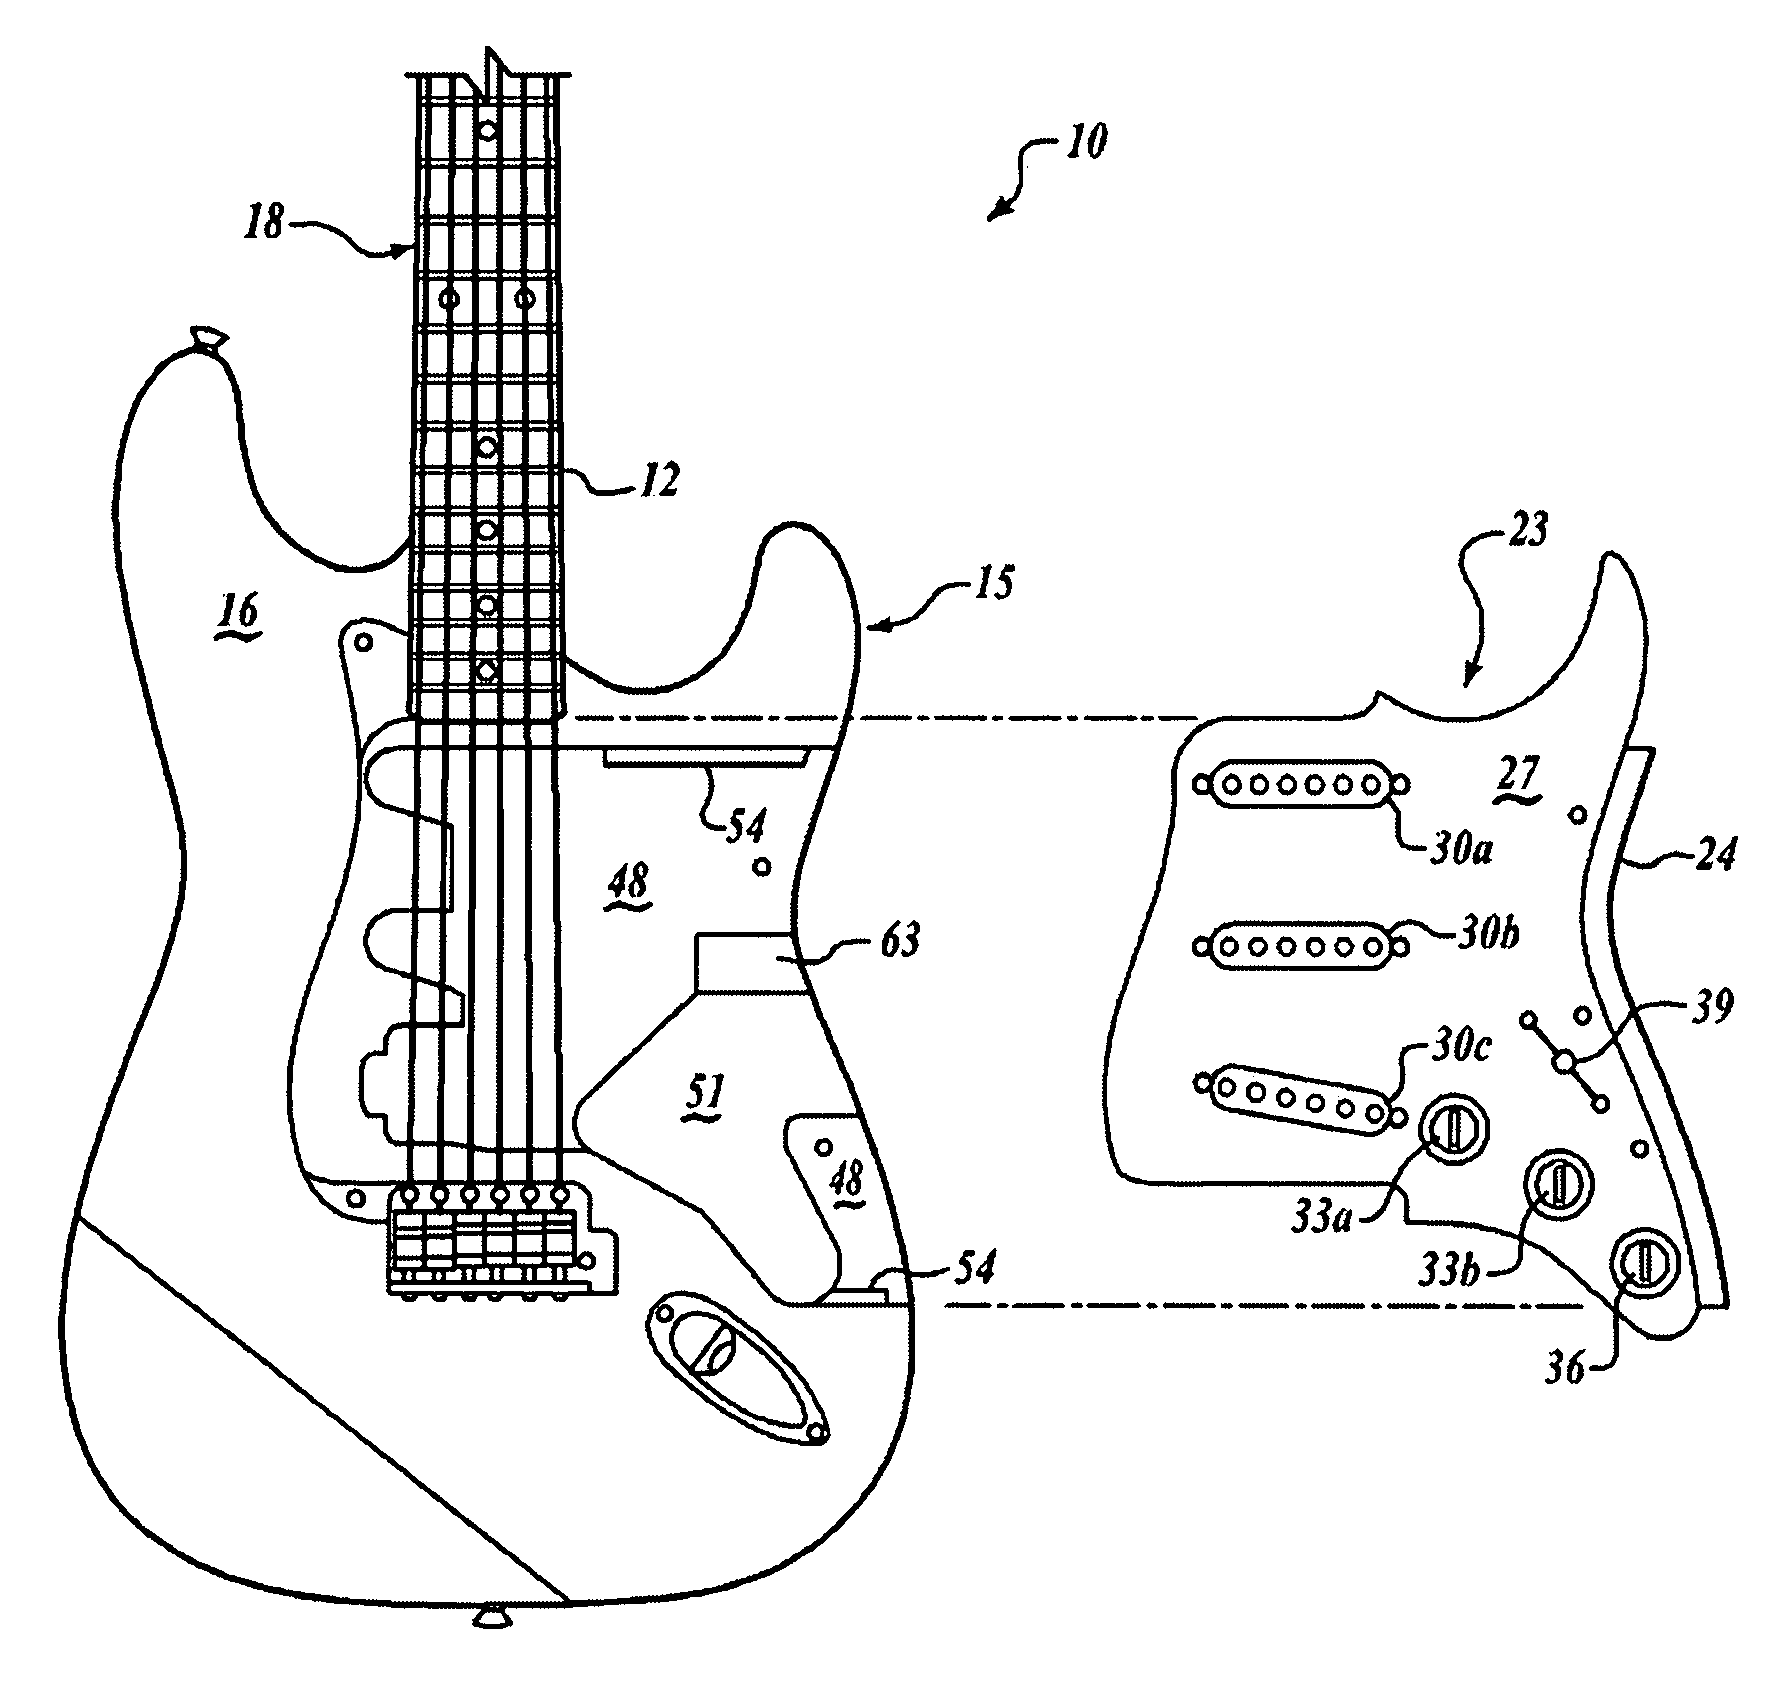 Docking system for pickups on electric guitars